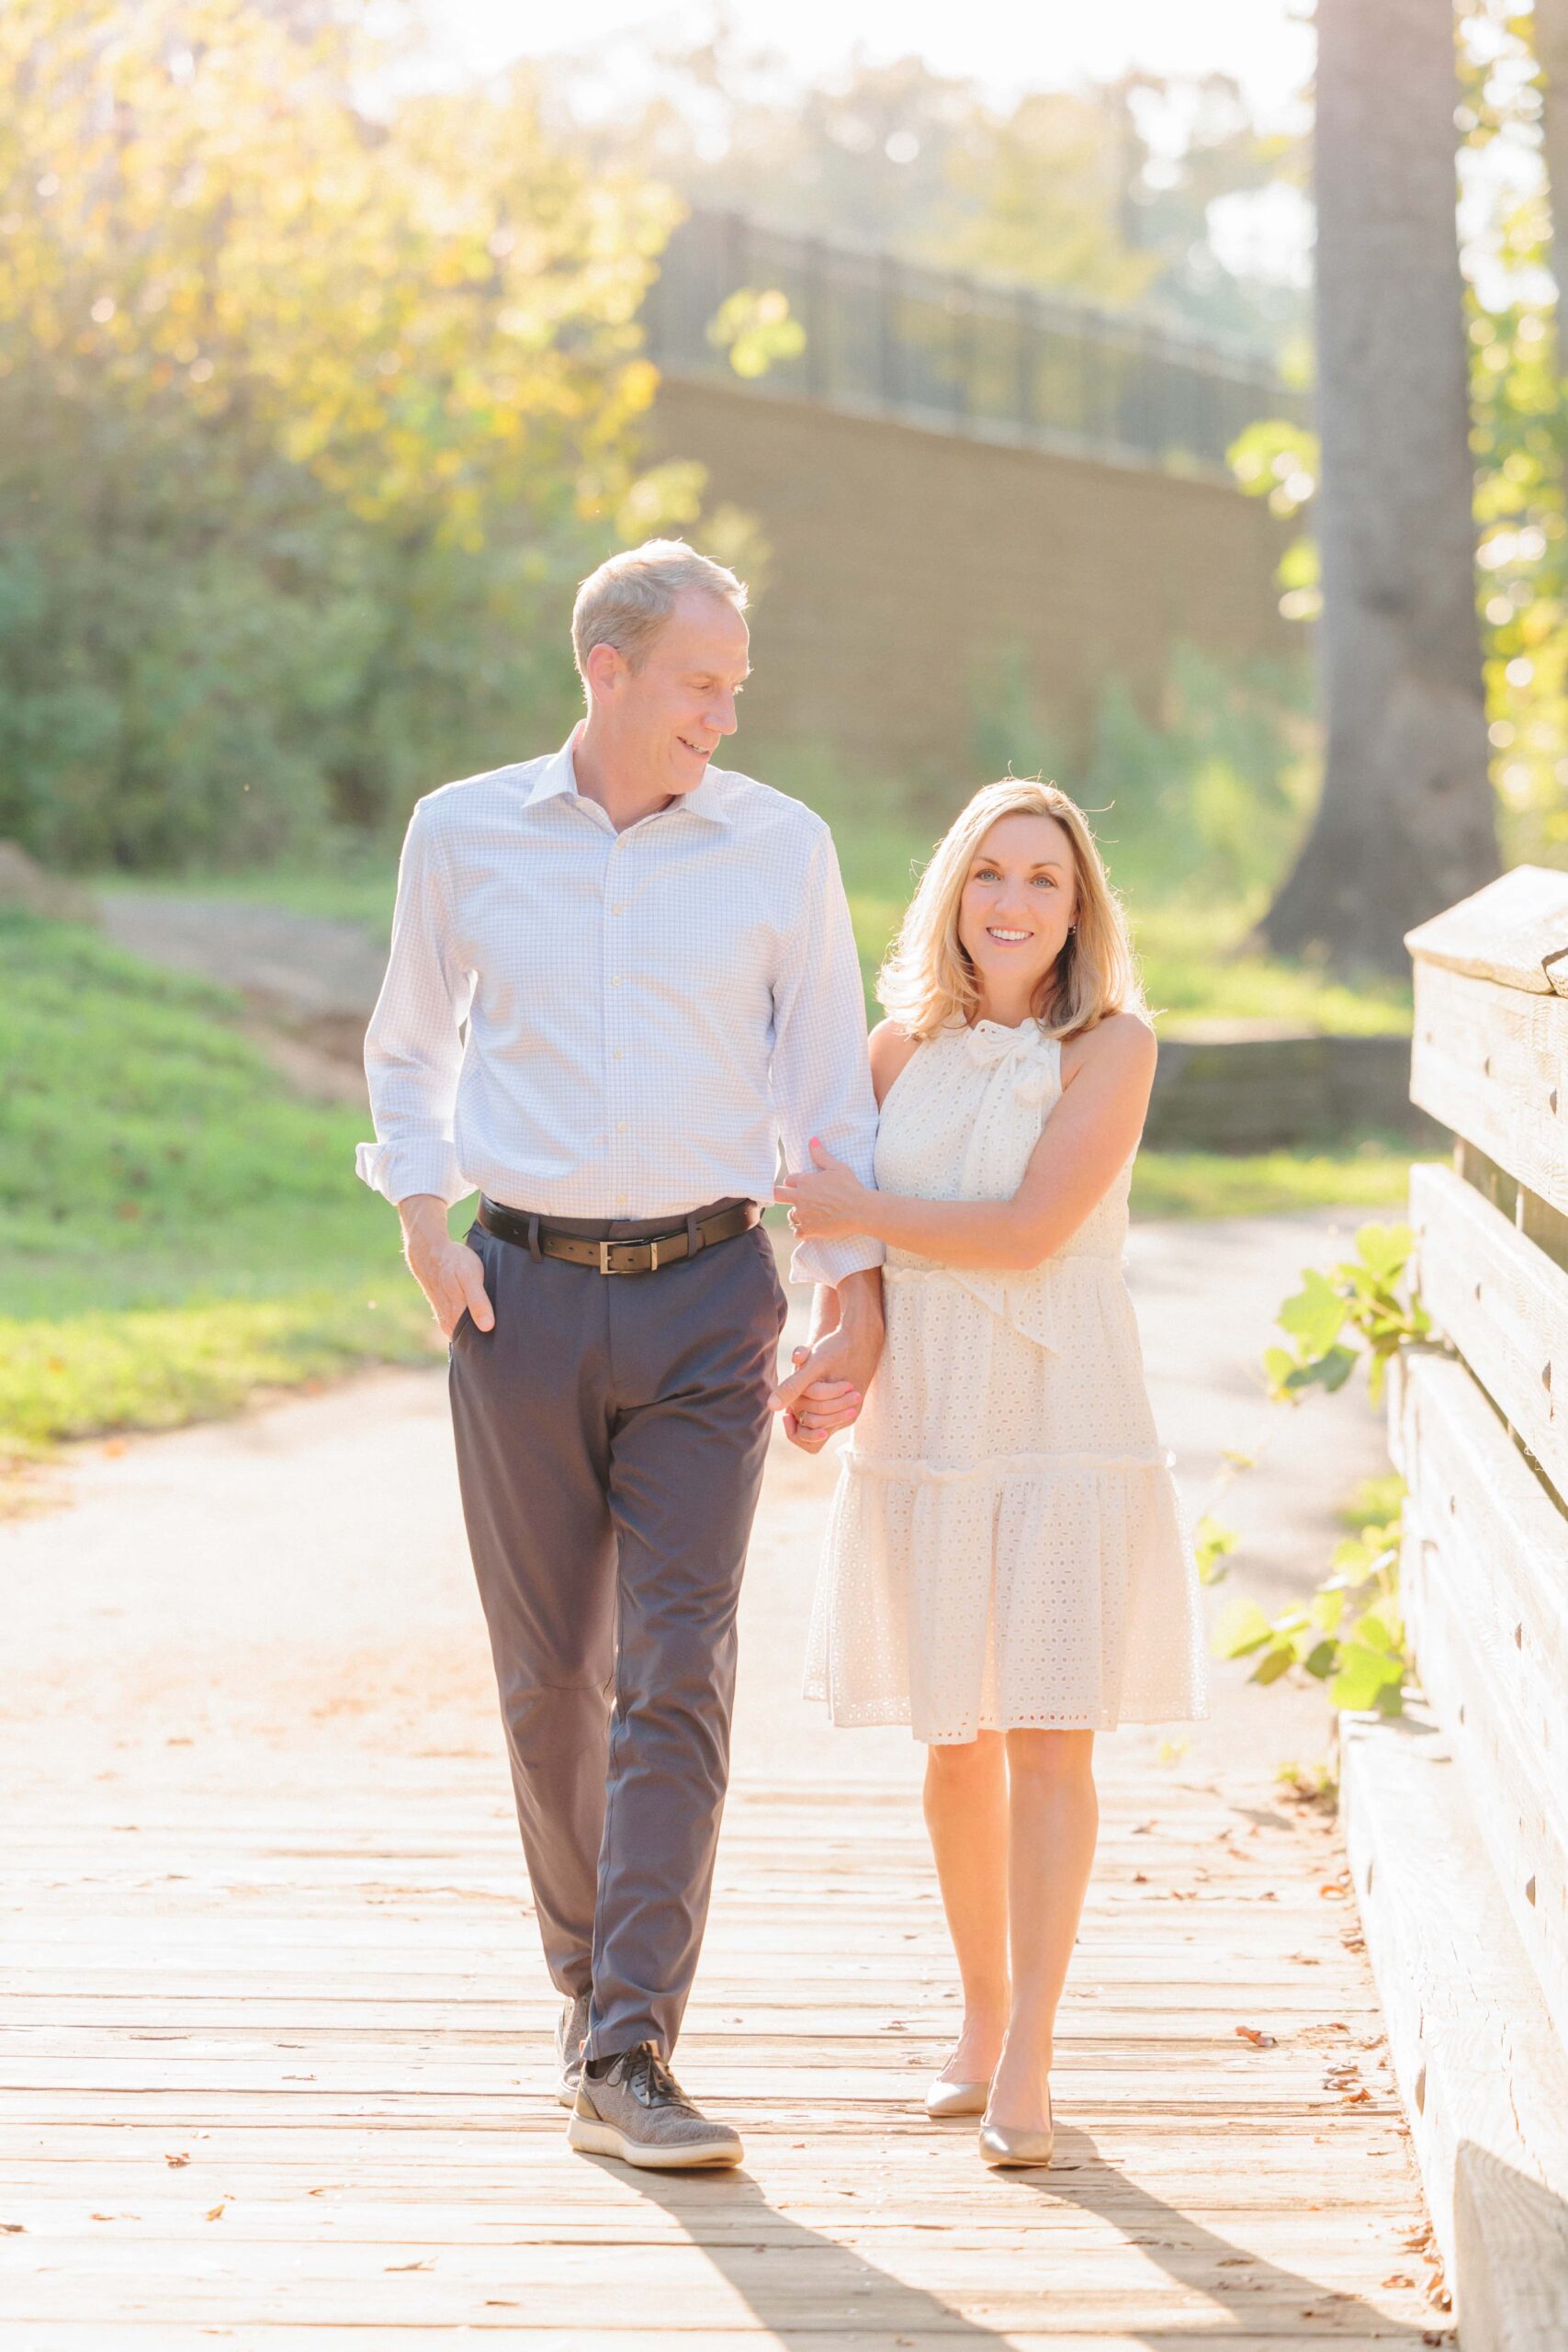 The beautiful engaged couple walks down the riverwalk path in Rock Hill, SC for this image.